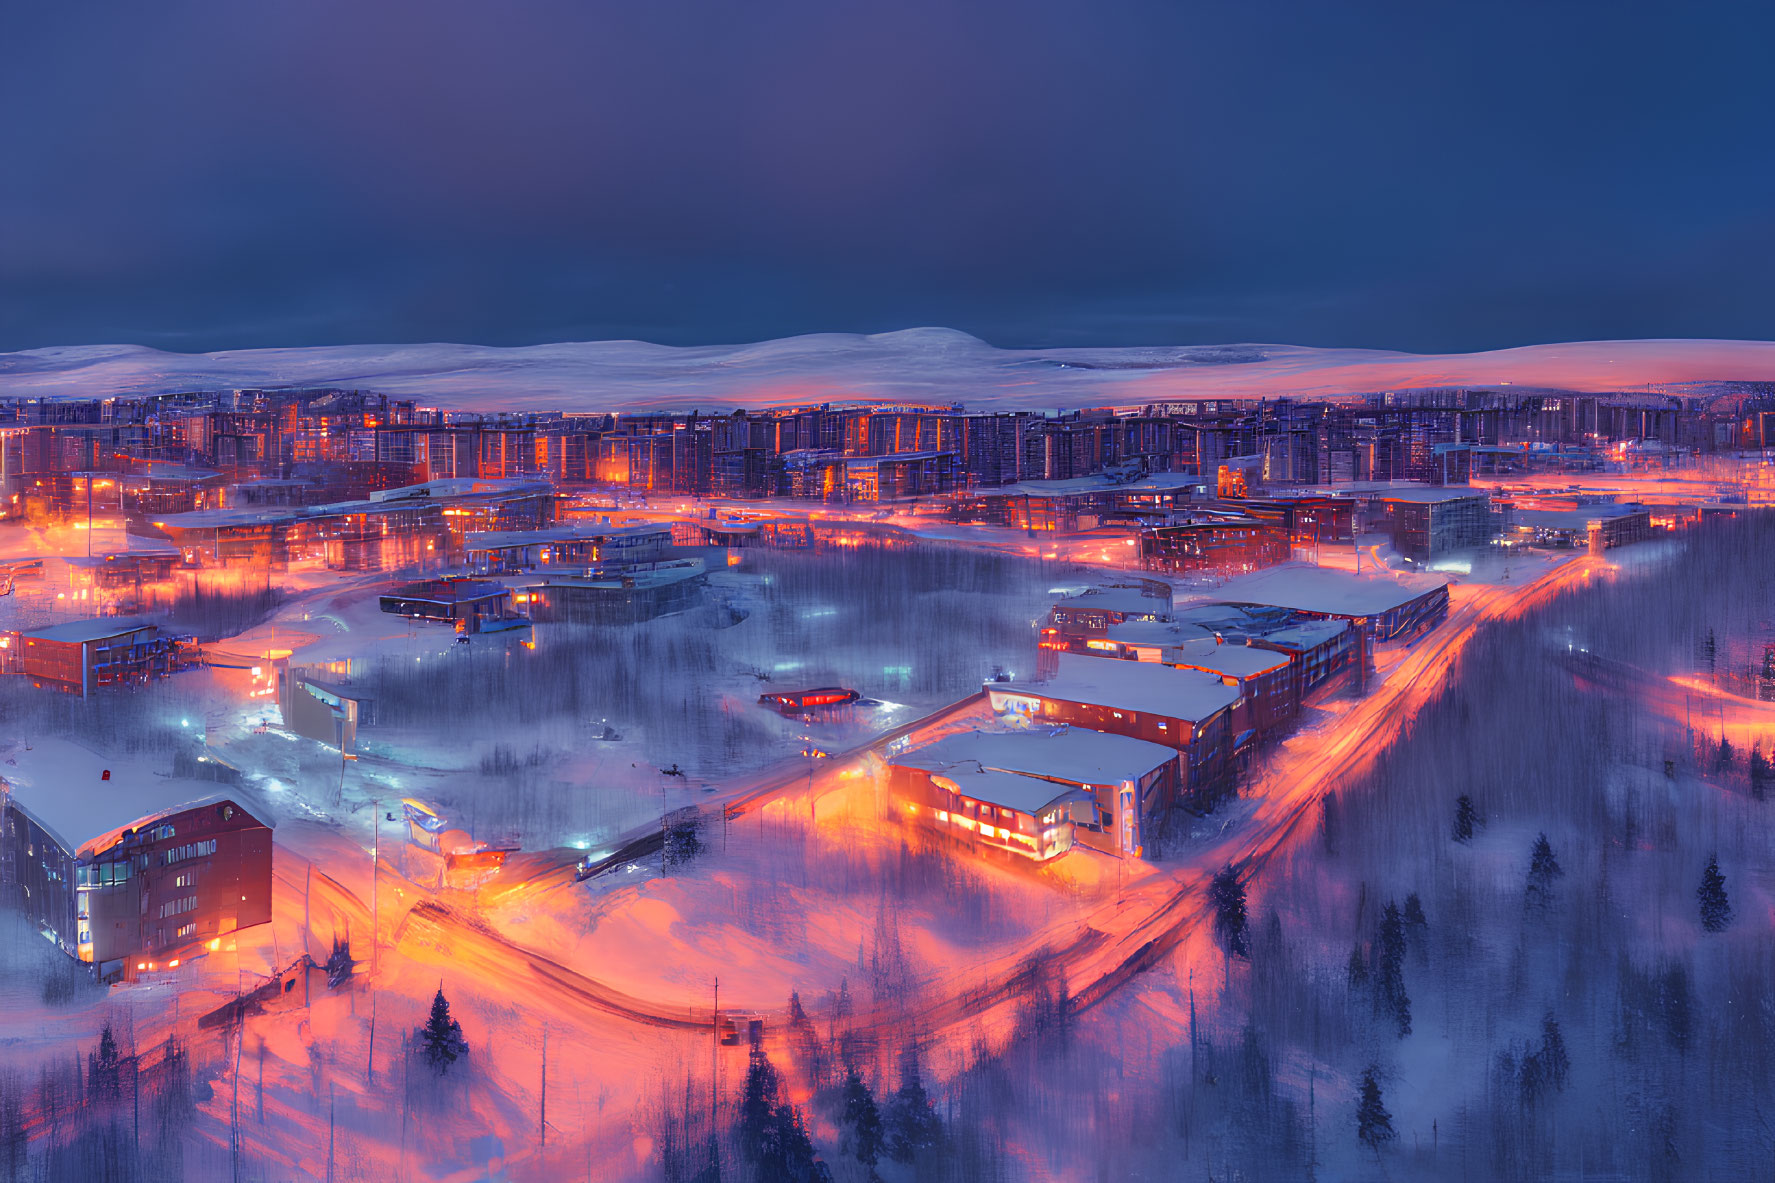 Snowy town at twilight with orange streetlights and illuminated buildings